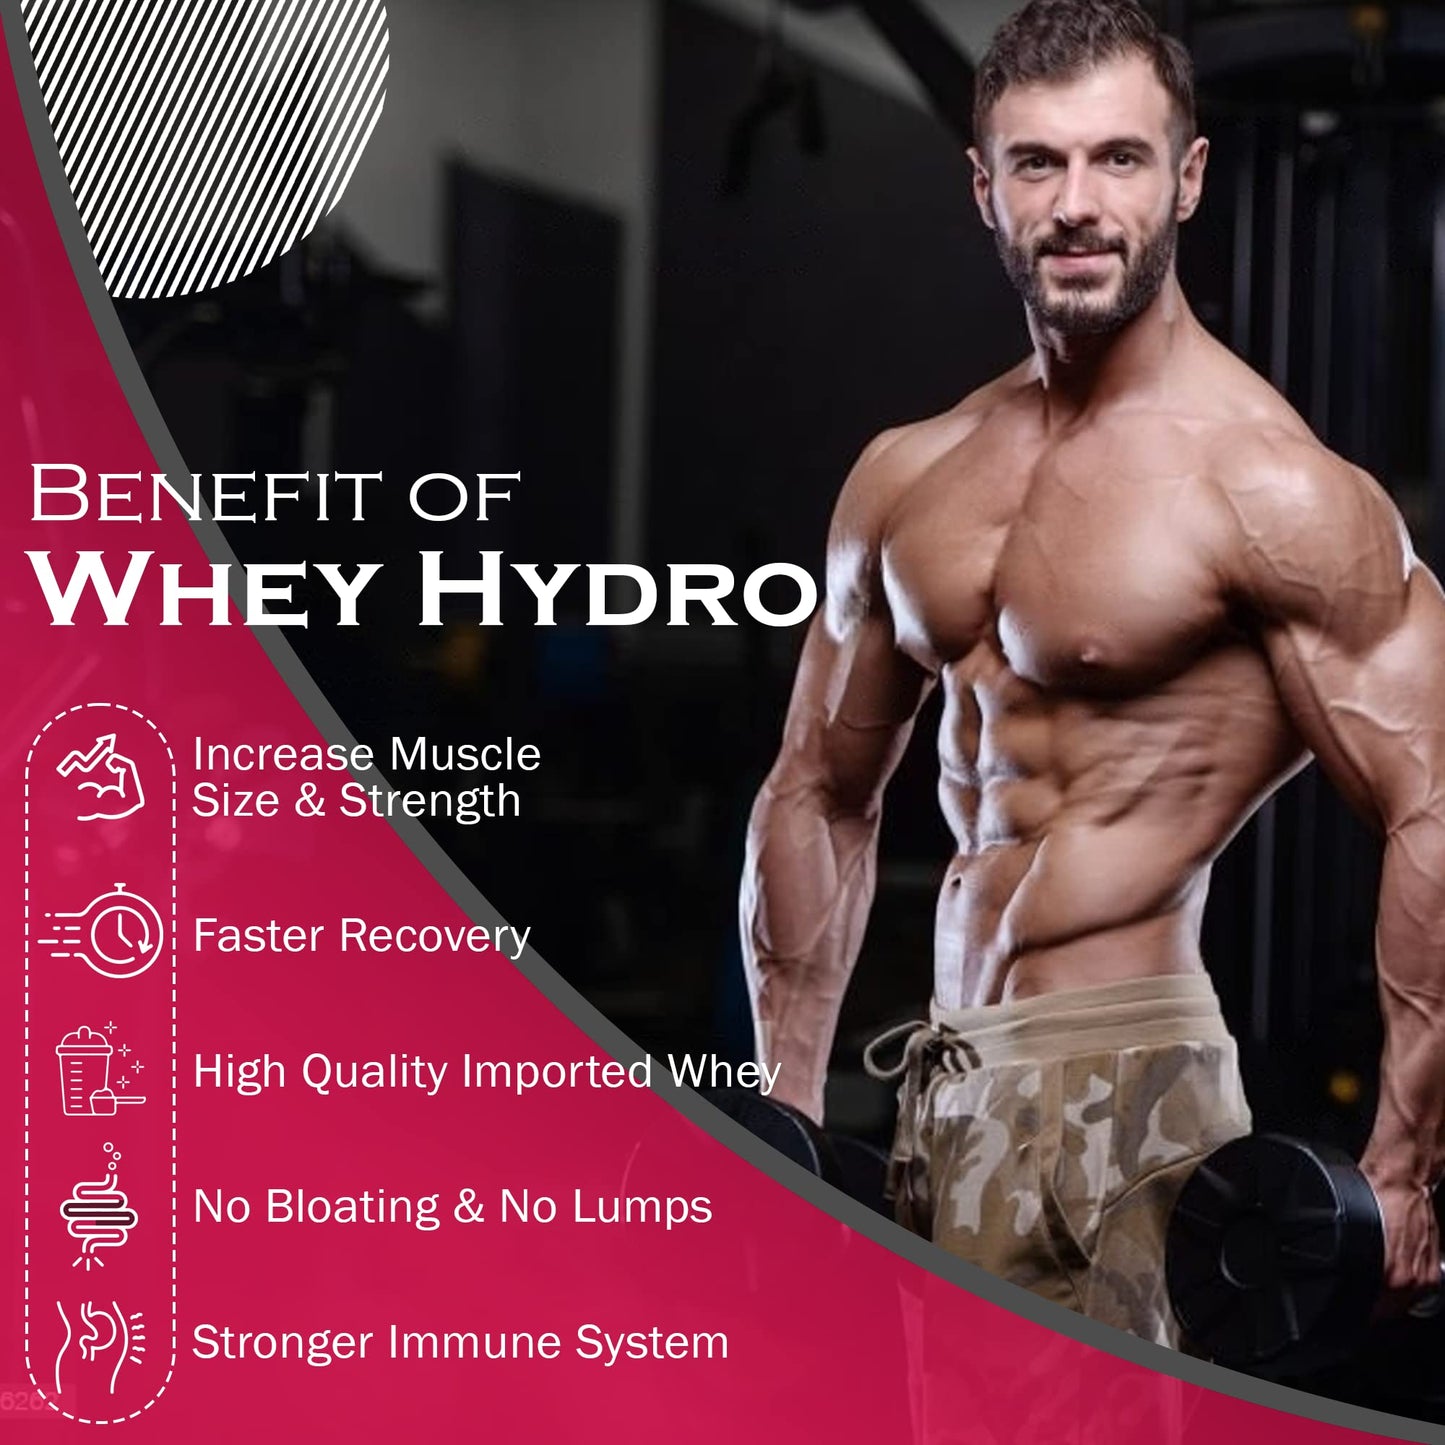 Nakpro HYDRO Whey Protein Hydrolyzed | 25.4g Protein, 5.8g BCAA | 1Kg Vanilla Flavour (30 Servings)